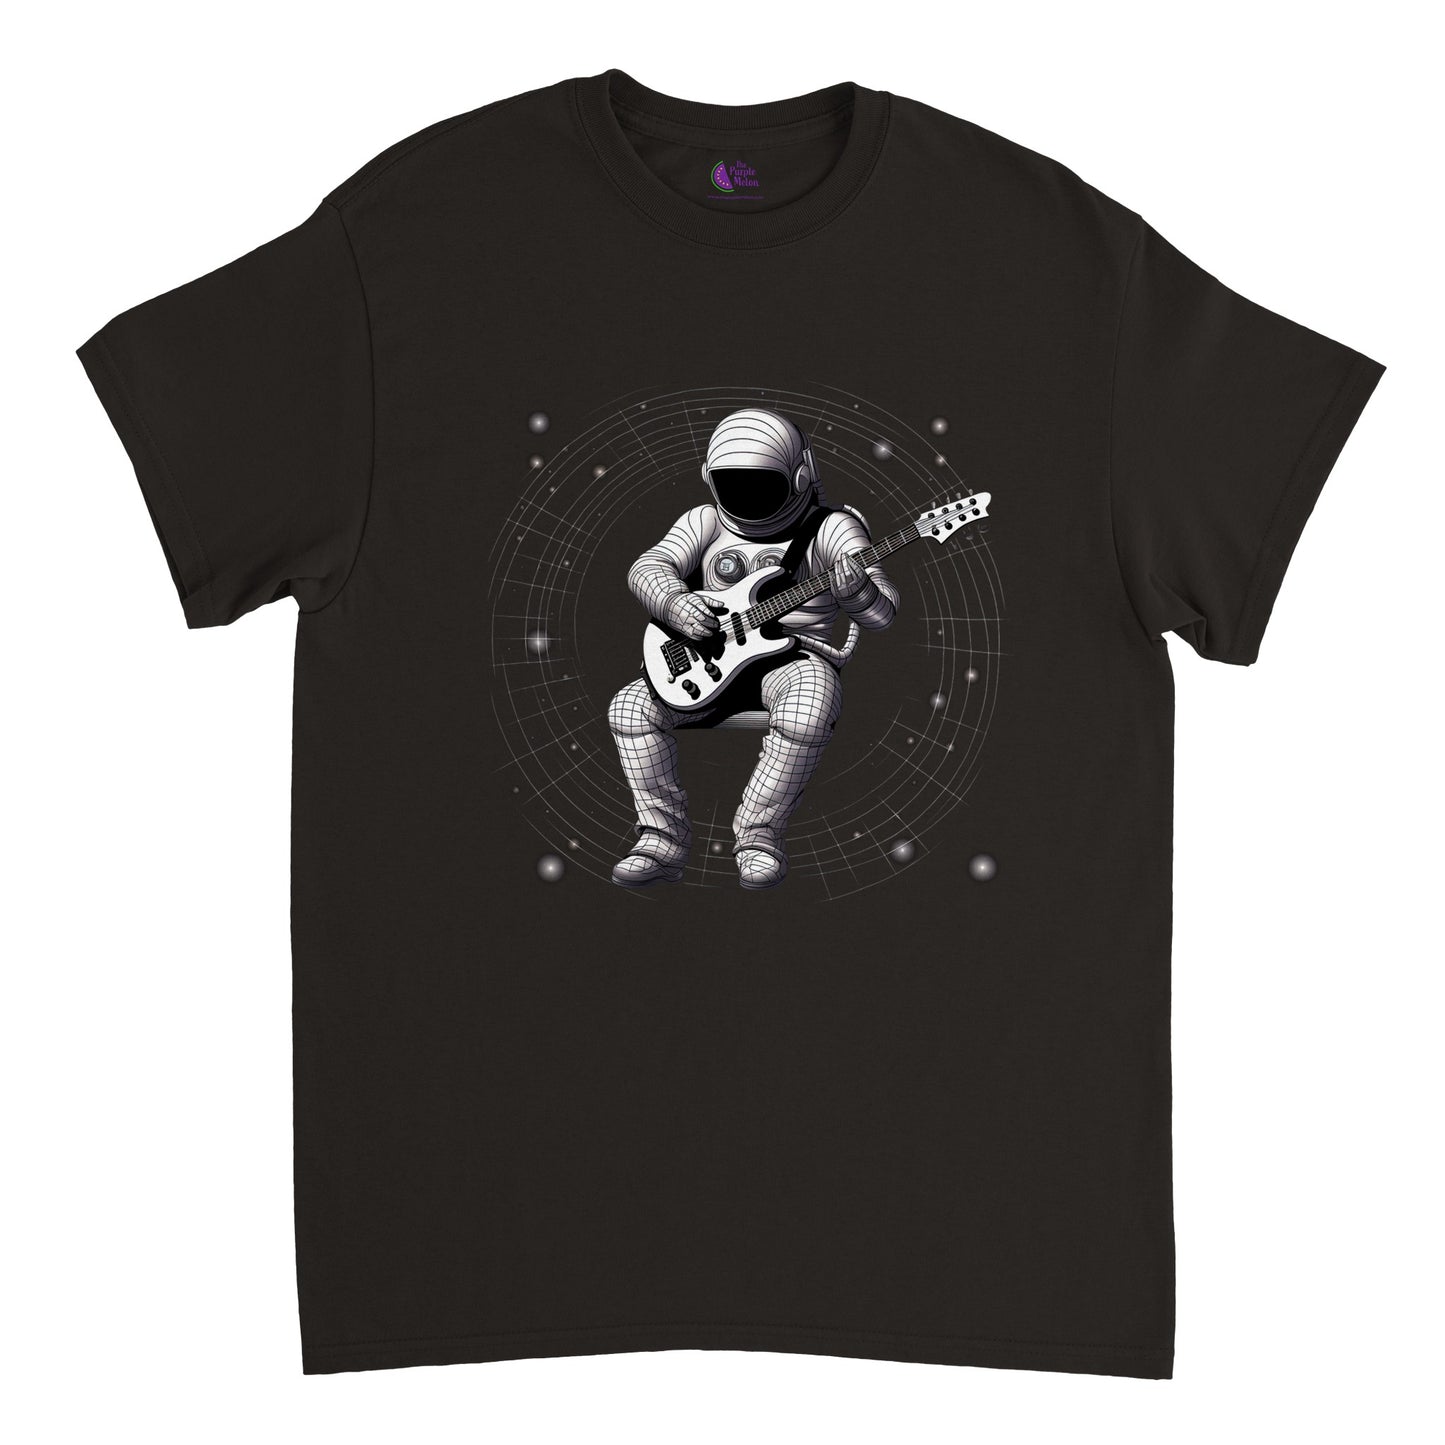 black t-shirt with astronaut playing guitar in space